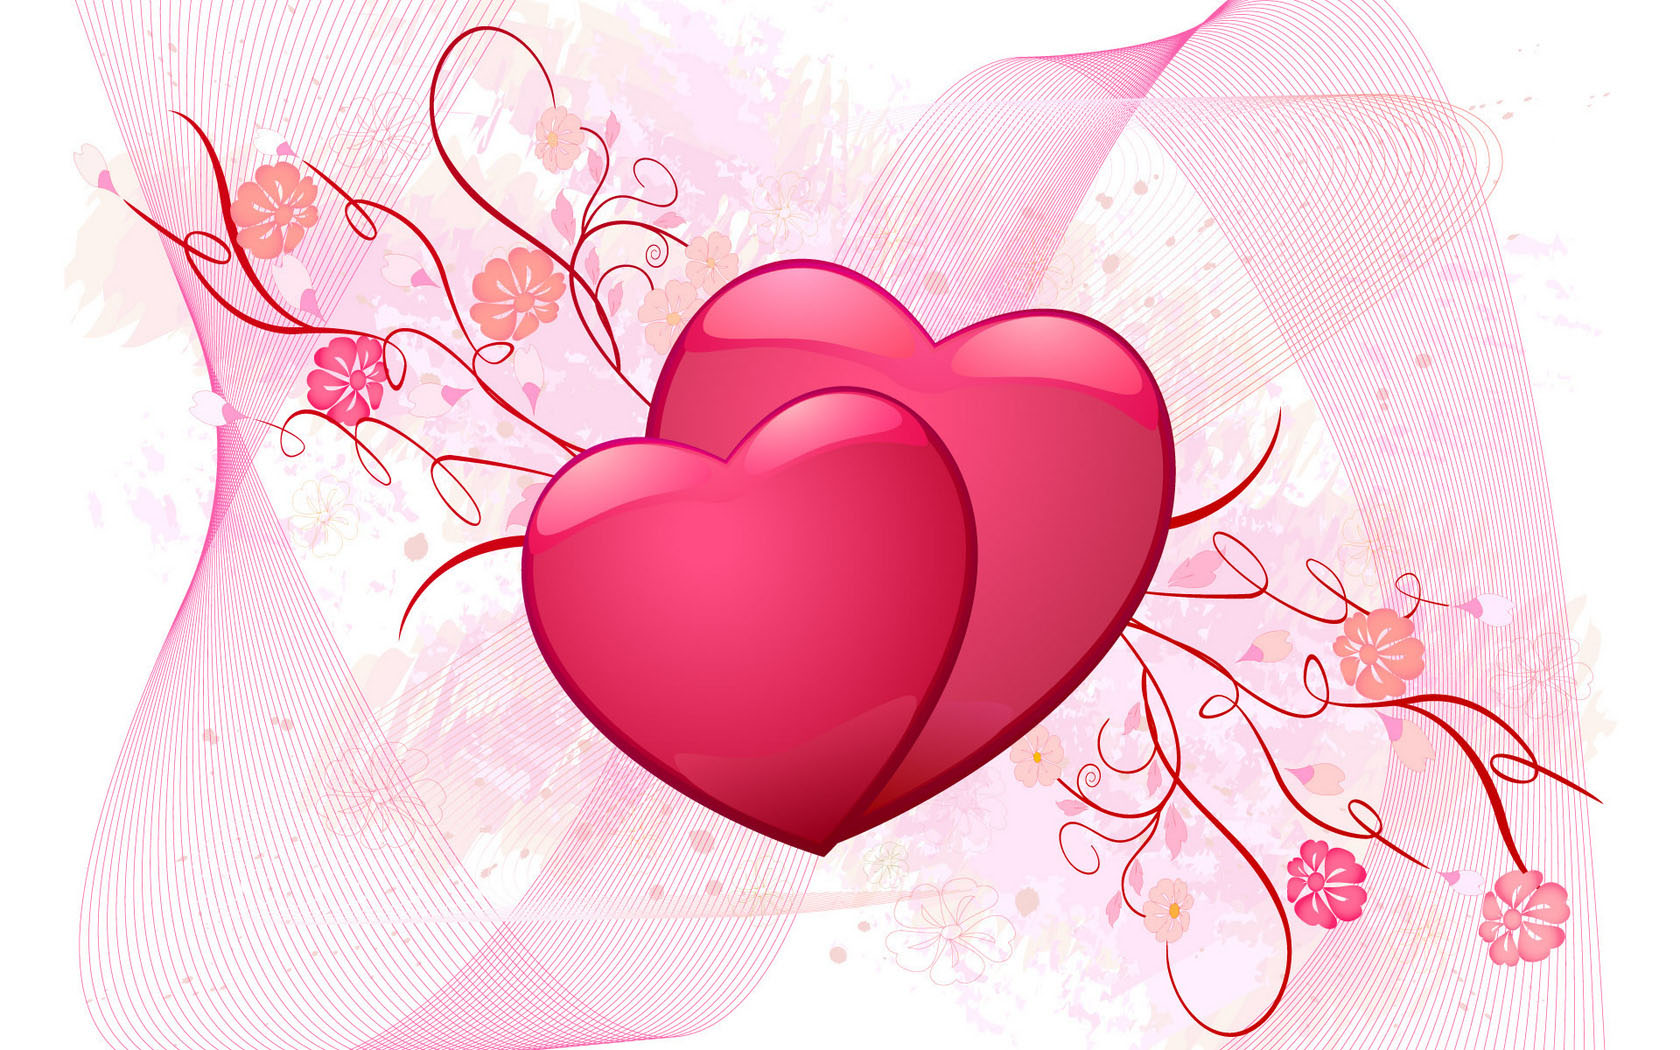 Velentines day wallpaper for the month of love (1)